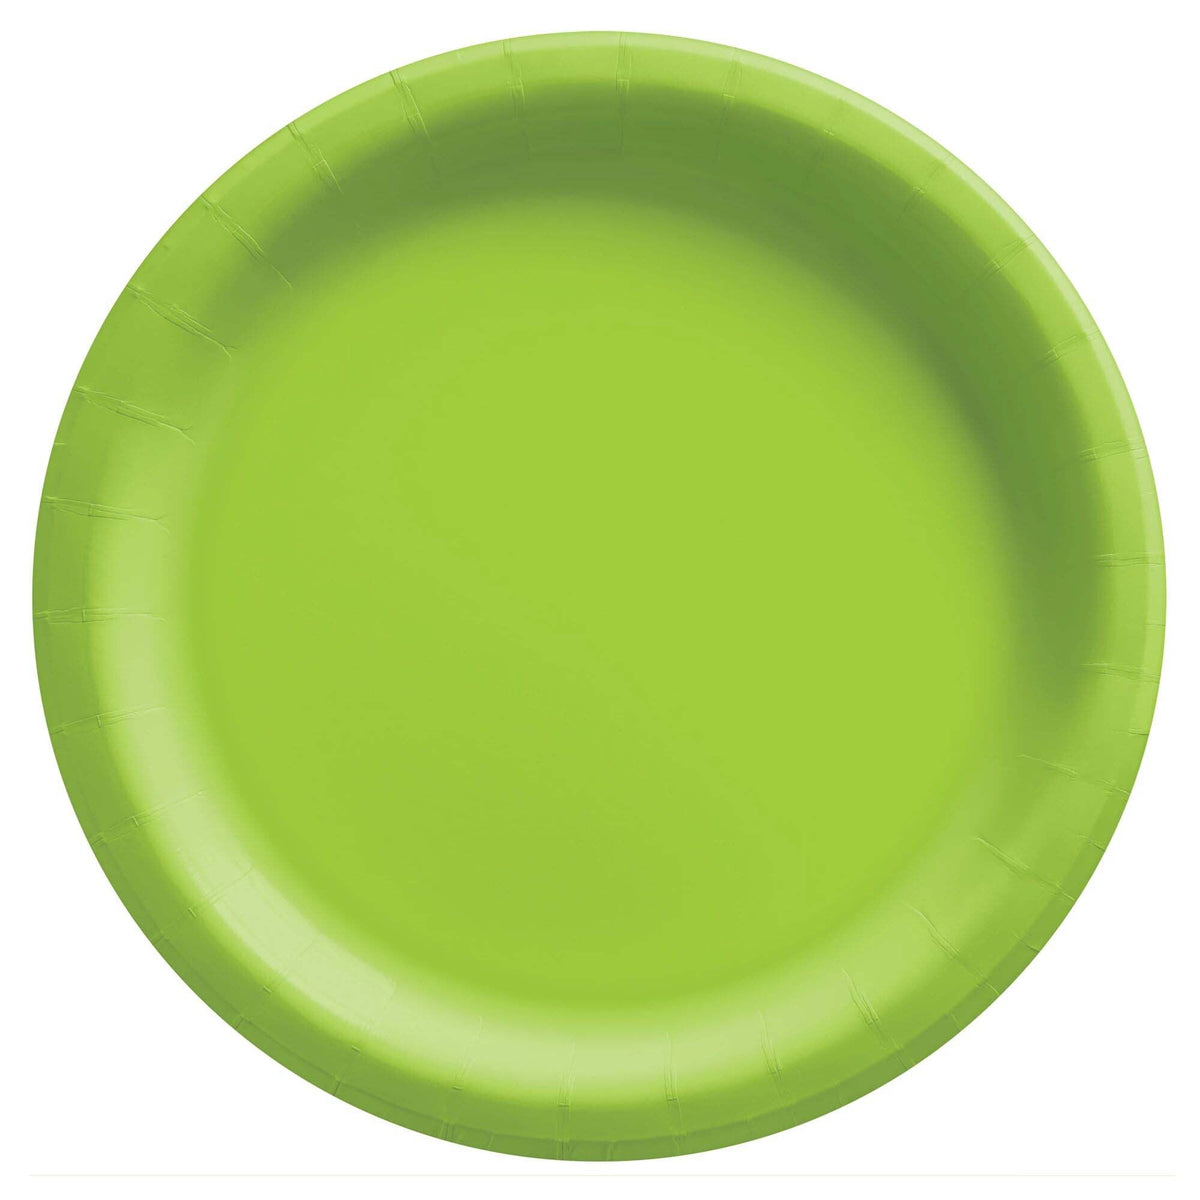 AMSCAN CA Disposable-Plasticware Kiwi Green Round Paper Plates, 9 Inches, 20 Count 192937242124